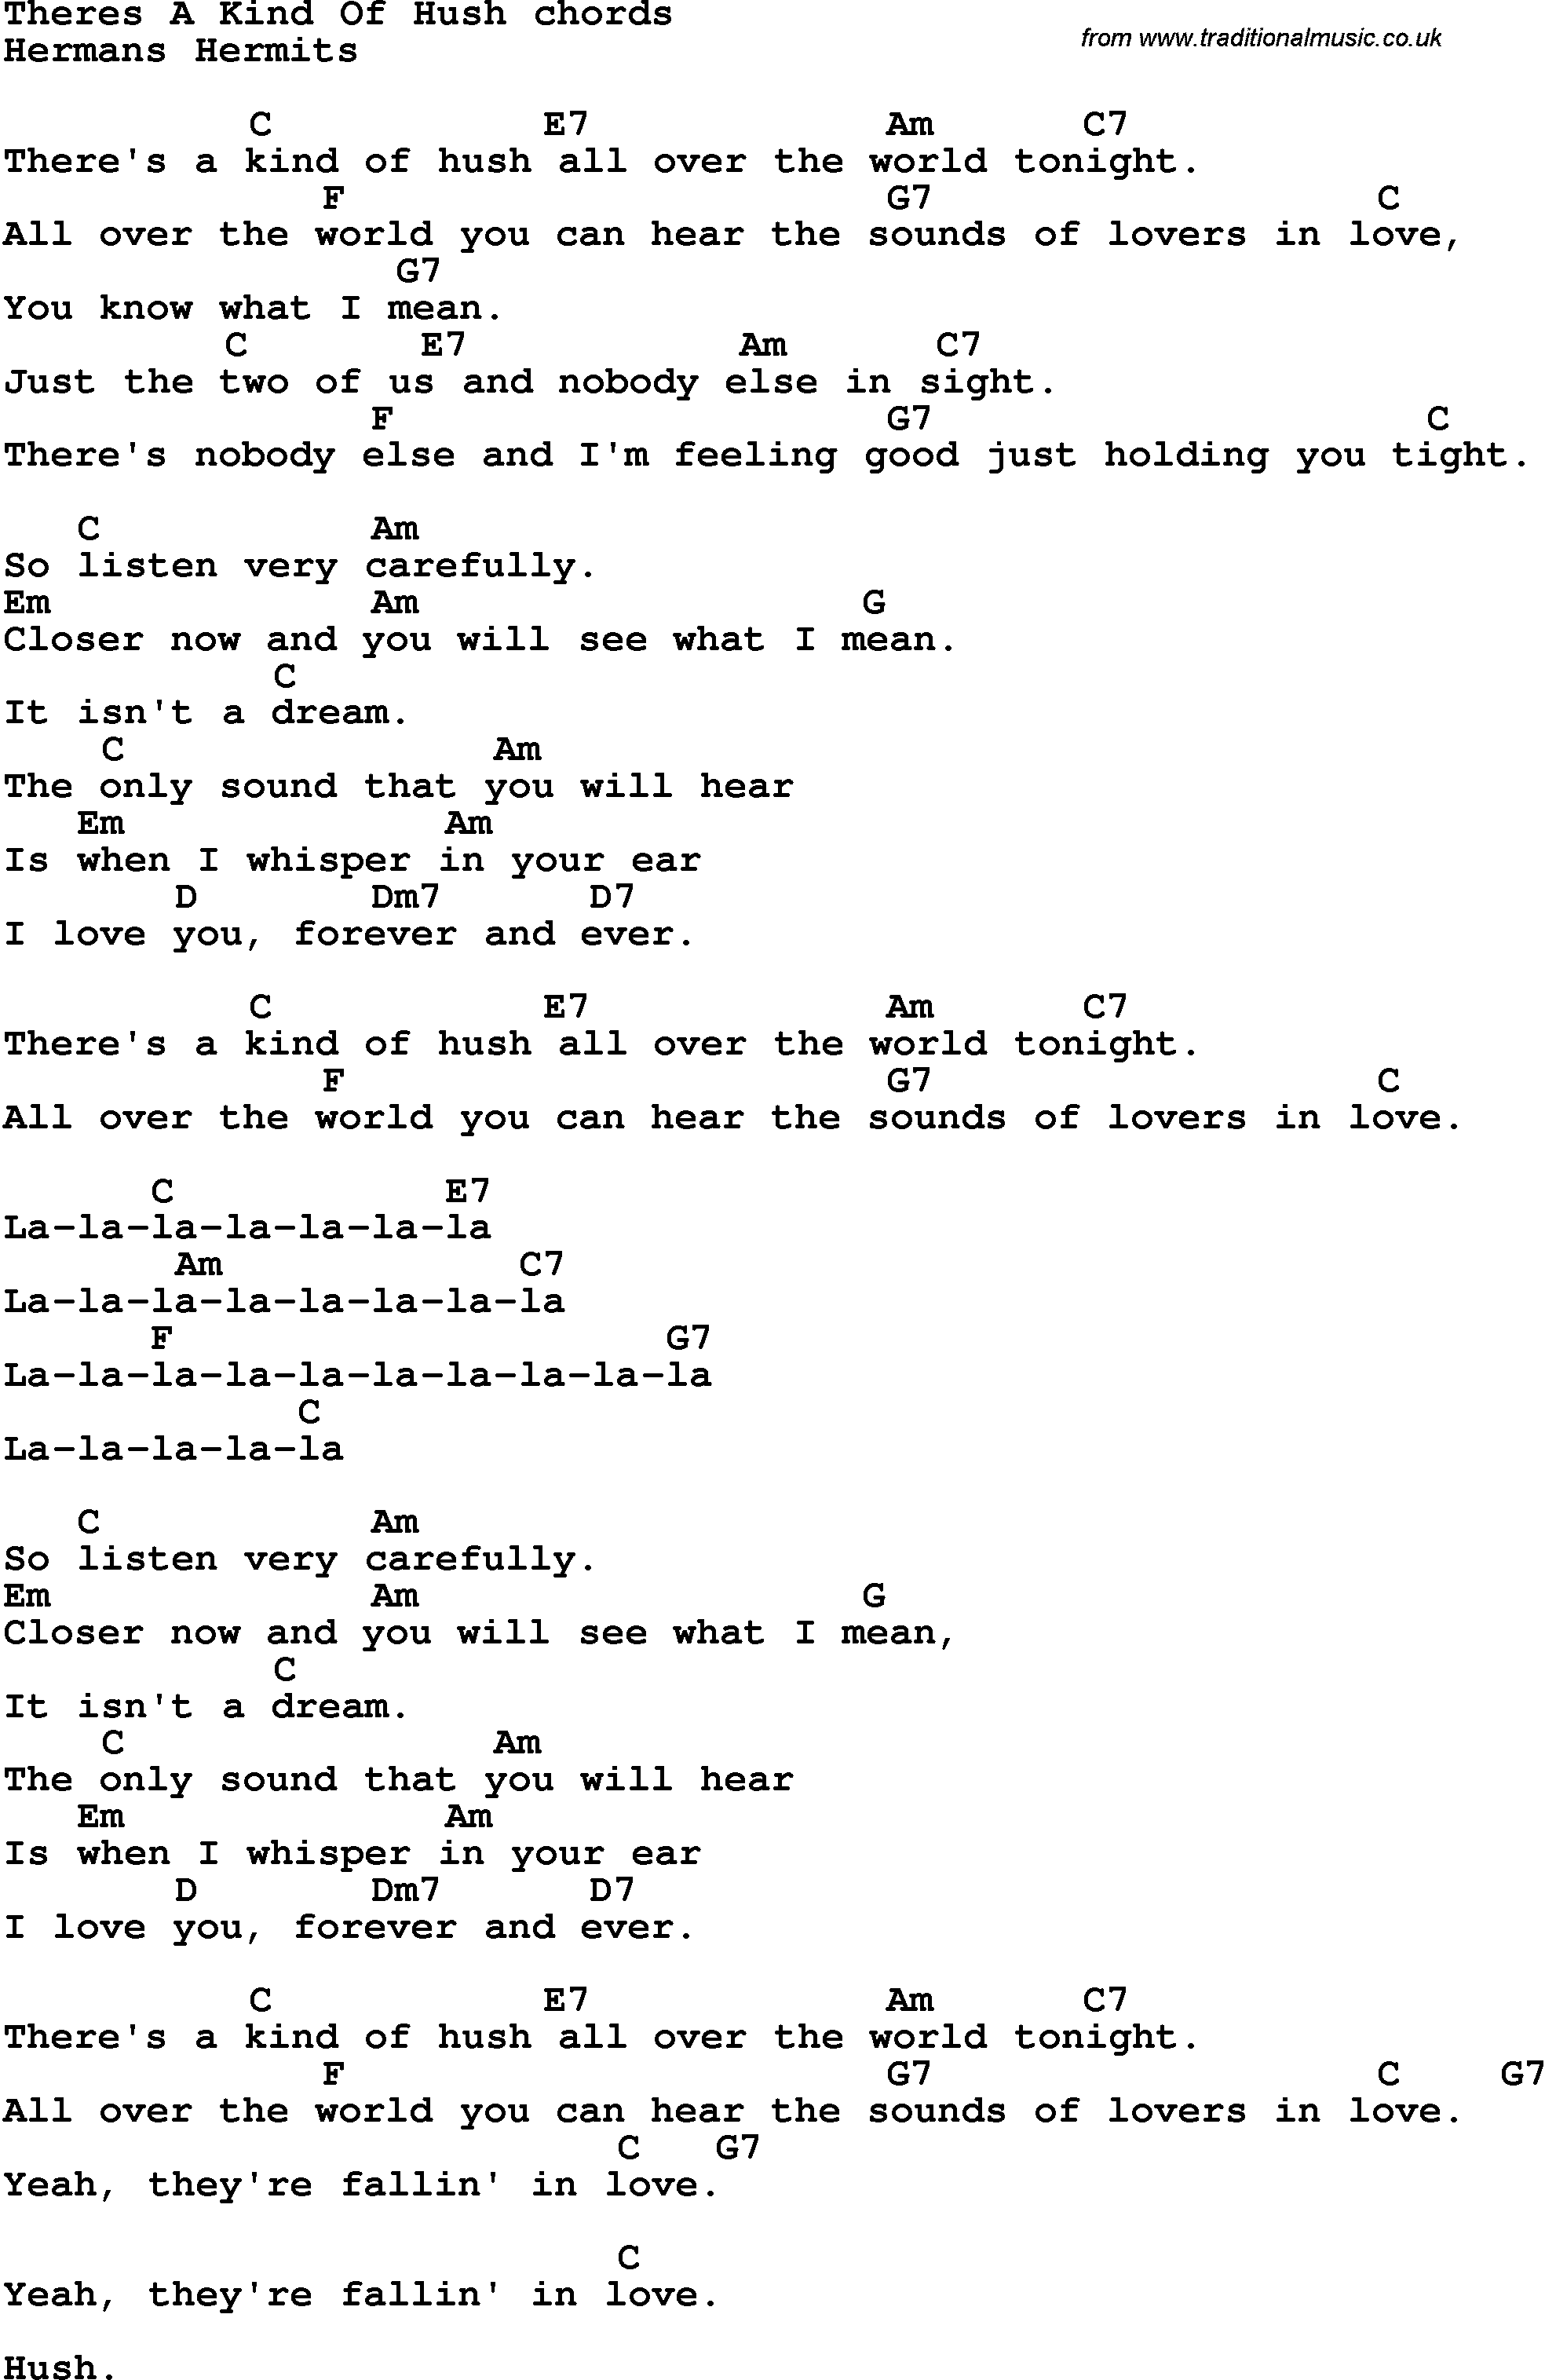 Song Lyrics with guitar chords for There's A Kind Of Hush - Herman’s Hermits